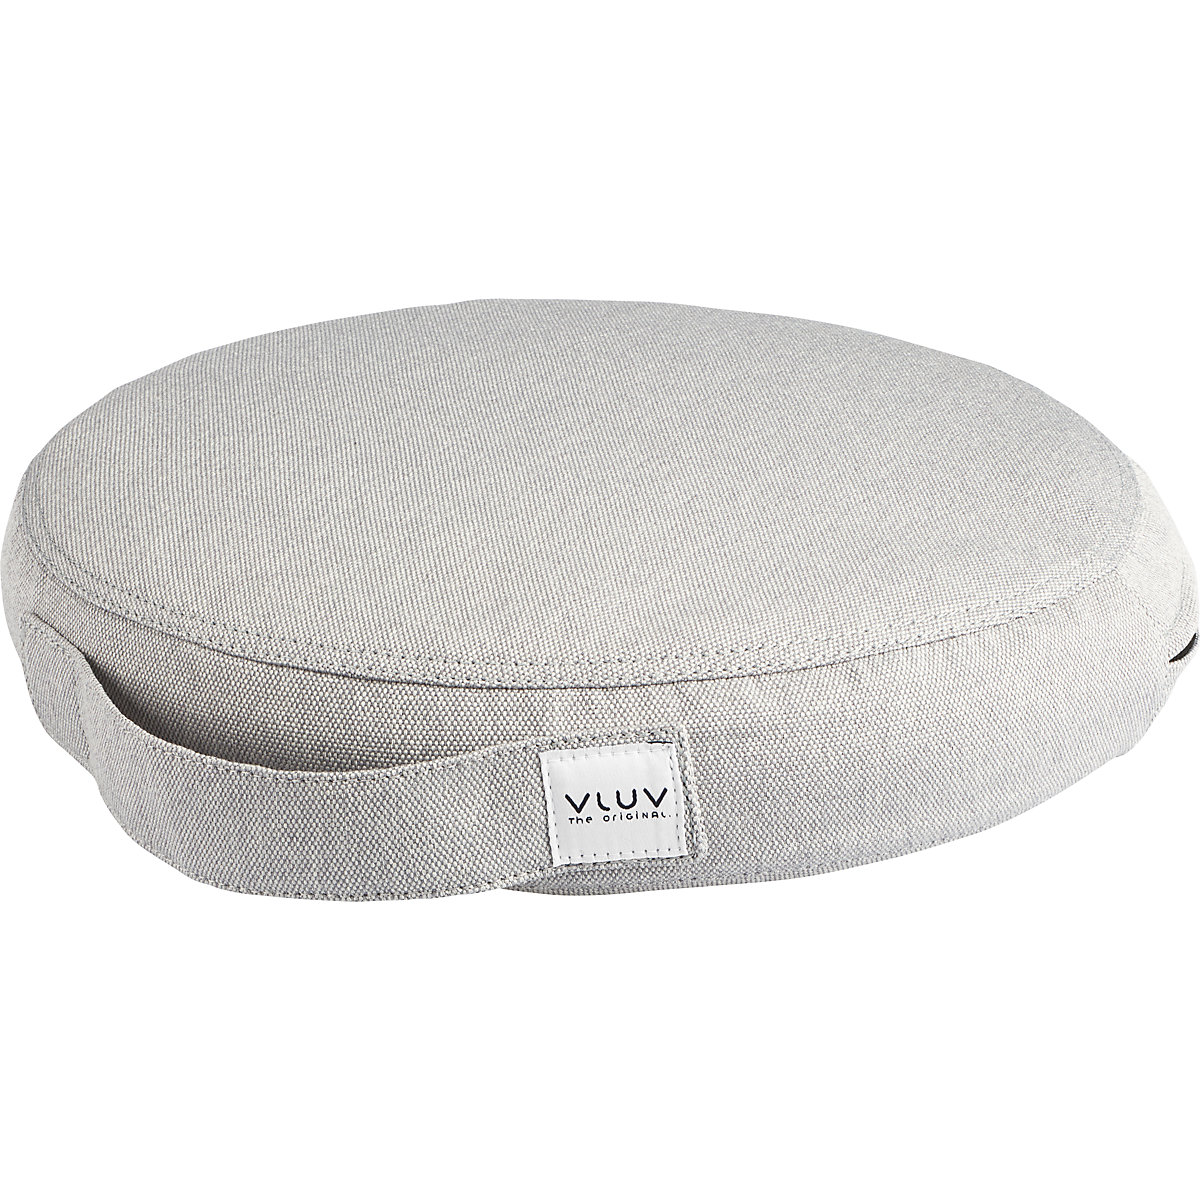 PIL&PED LEIV balance cushion – VLUV, with fabric cover, Ø 360 mm, silver grey